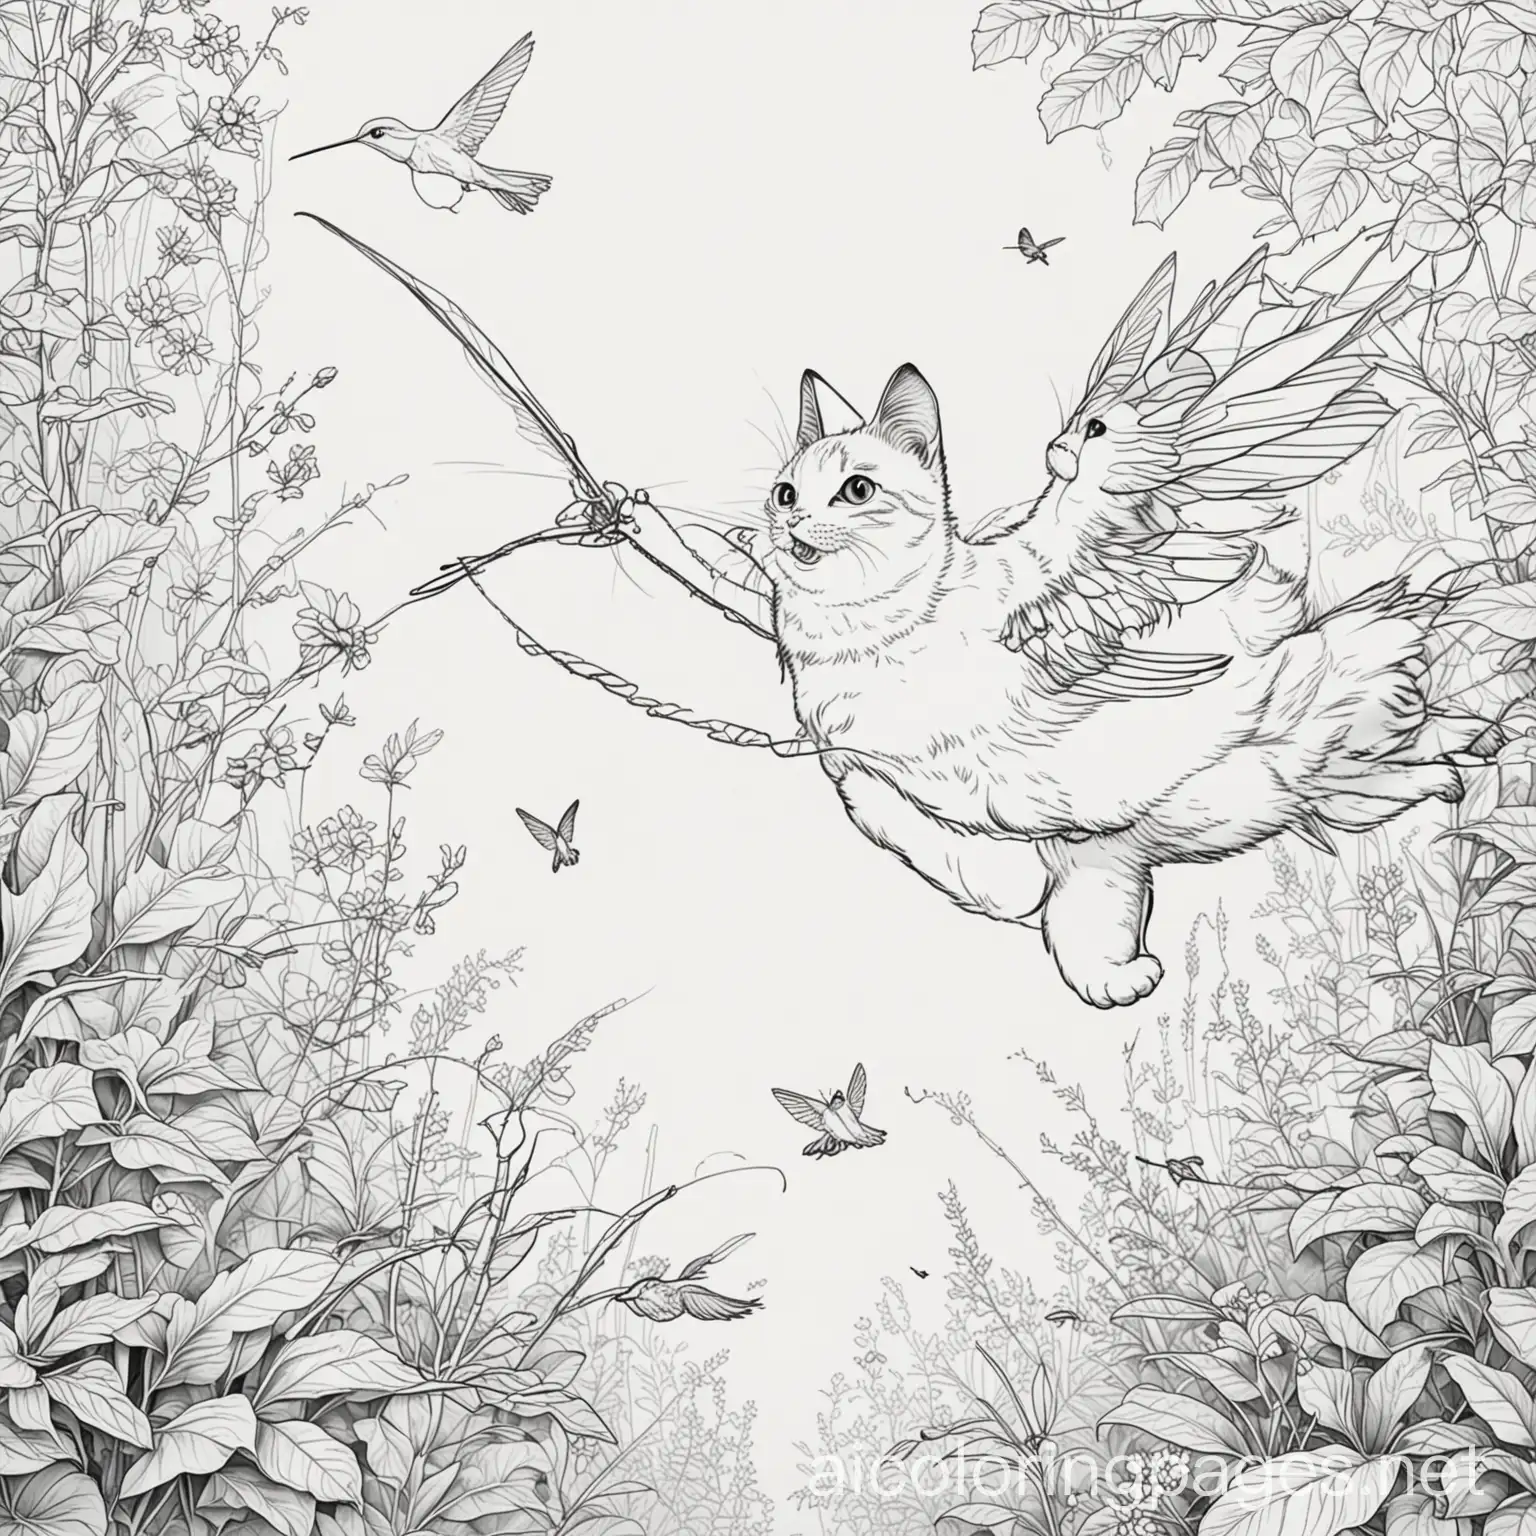 Cat chasing hummingbirds net, Coloring Page, black and white, line art, white background, Simplicity, Ample White Space. The background of the coloring page is plain white to make it easy for young children to color within the lines. The outlines of all the subjects are easy to distinguish, making it simple for kids to color without too much difficulty